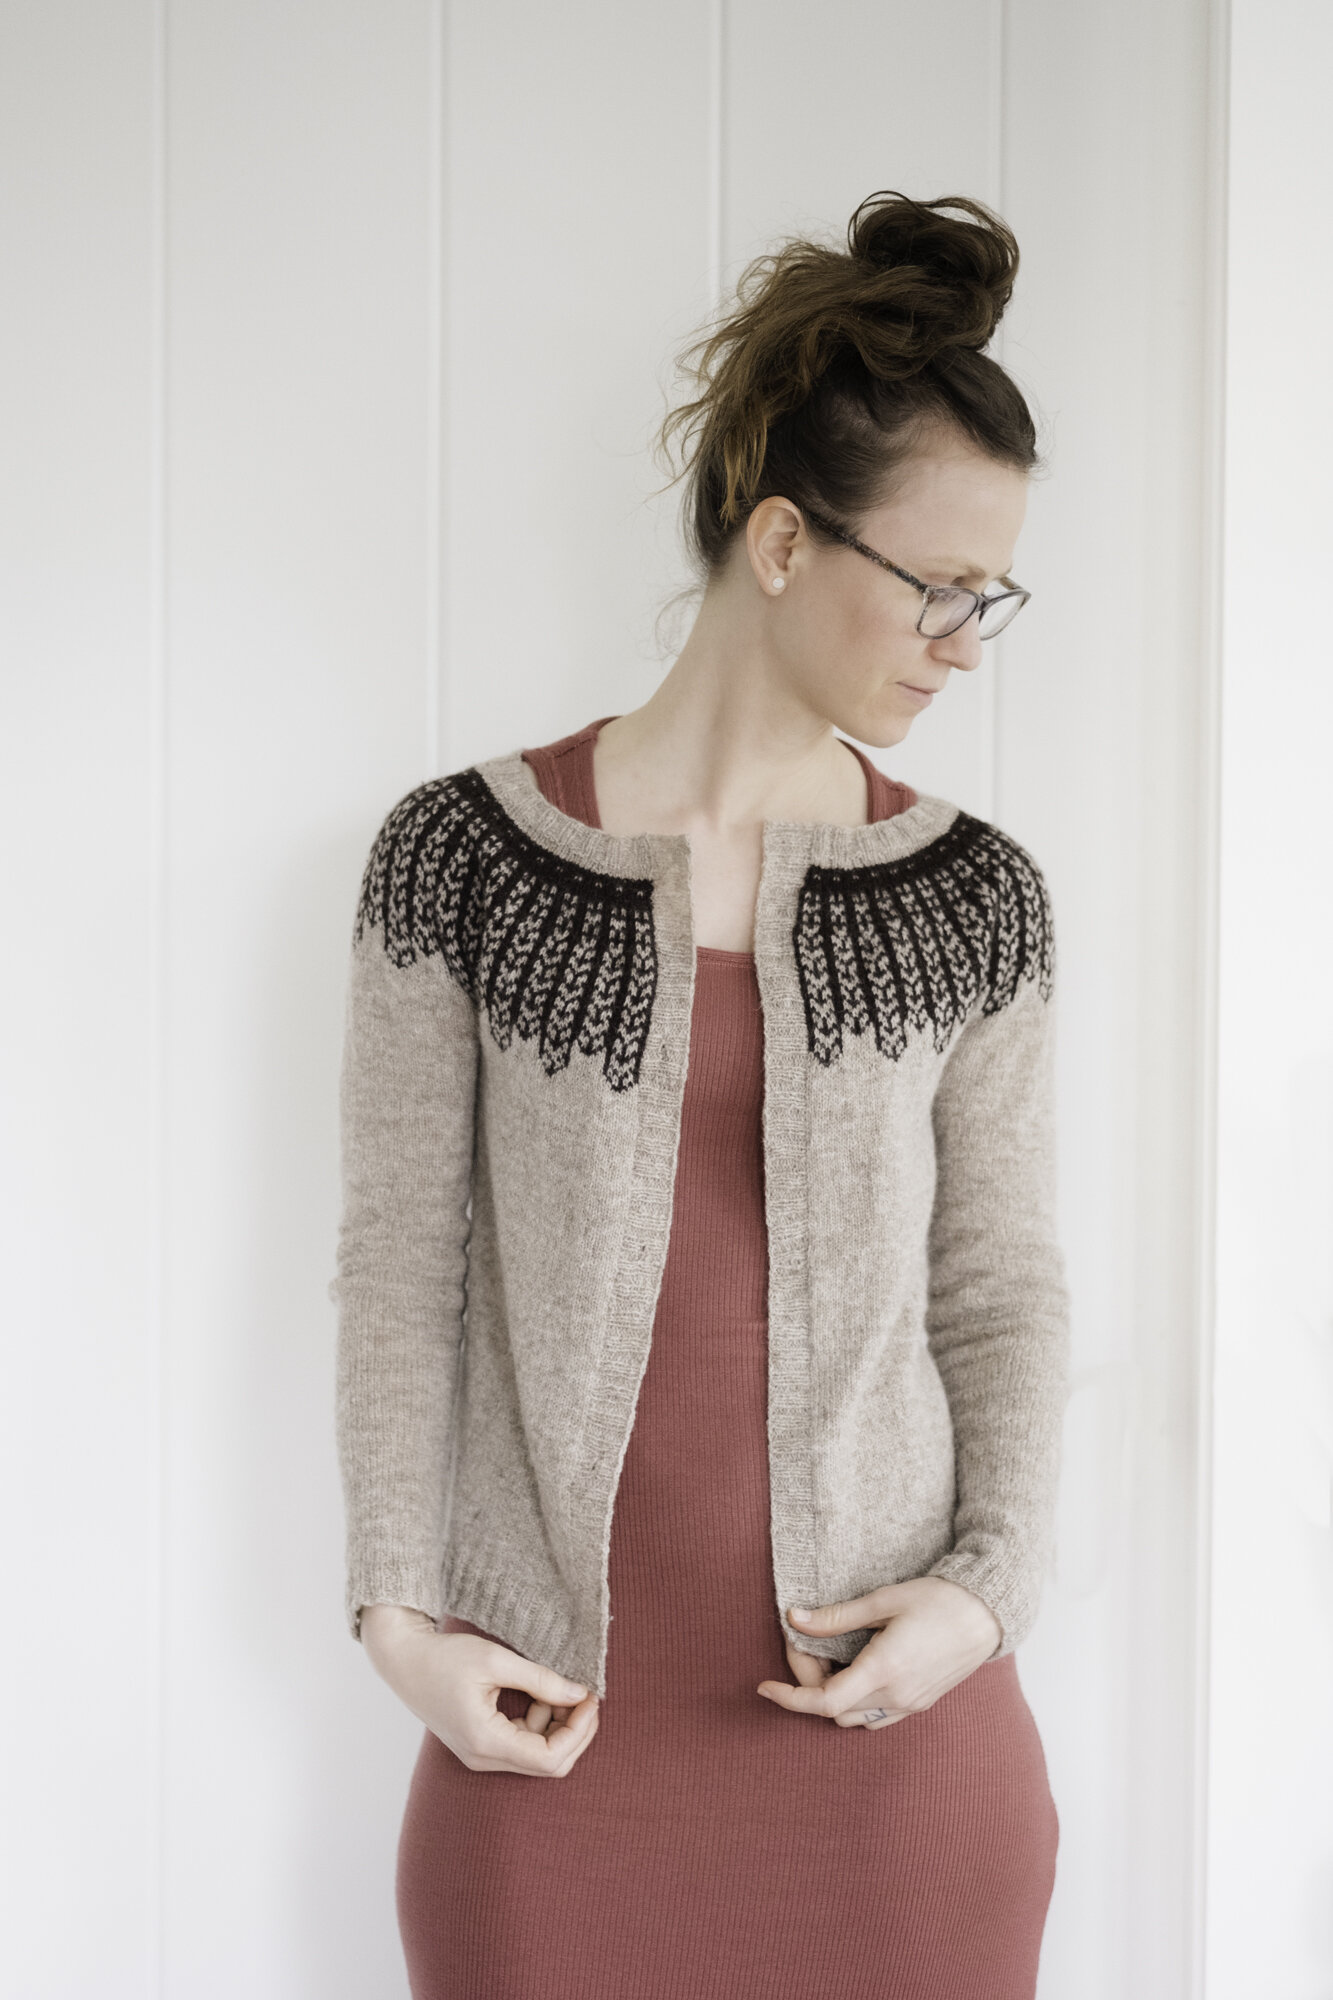 Fifty Below – Crochet Pattern for Textured Color-Block Sweater